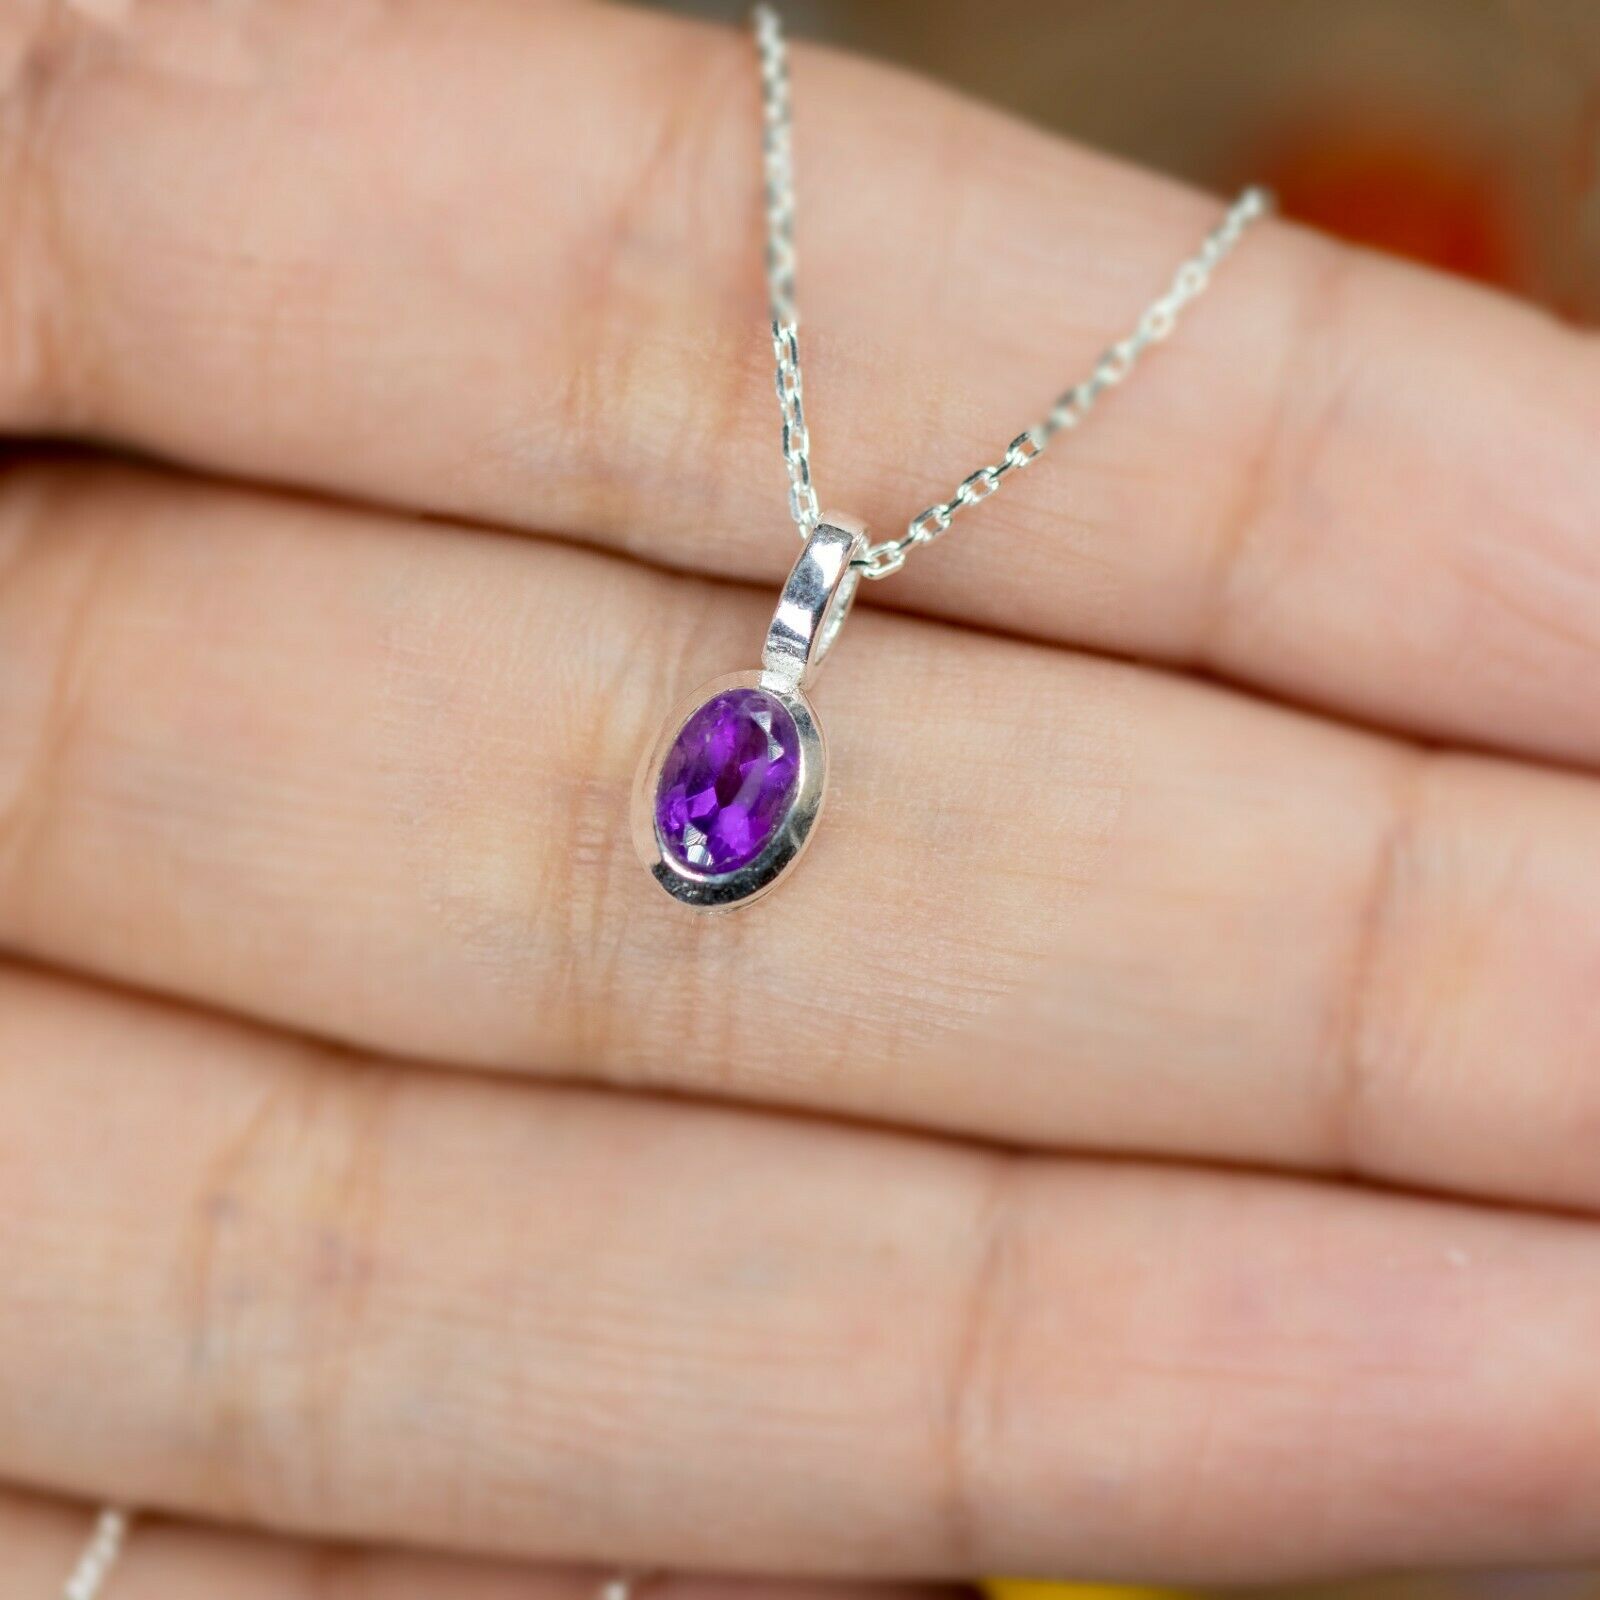 Small Oval Amethyst Sterling 925 Silver Pendant Necklace Ladies Jewellery Gift